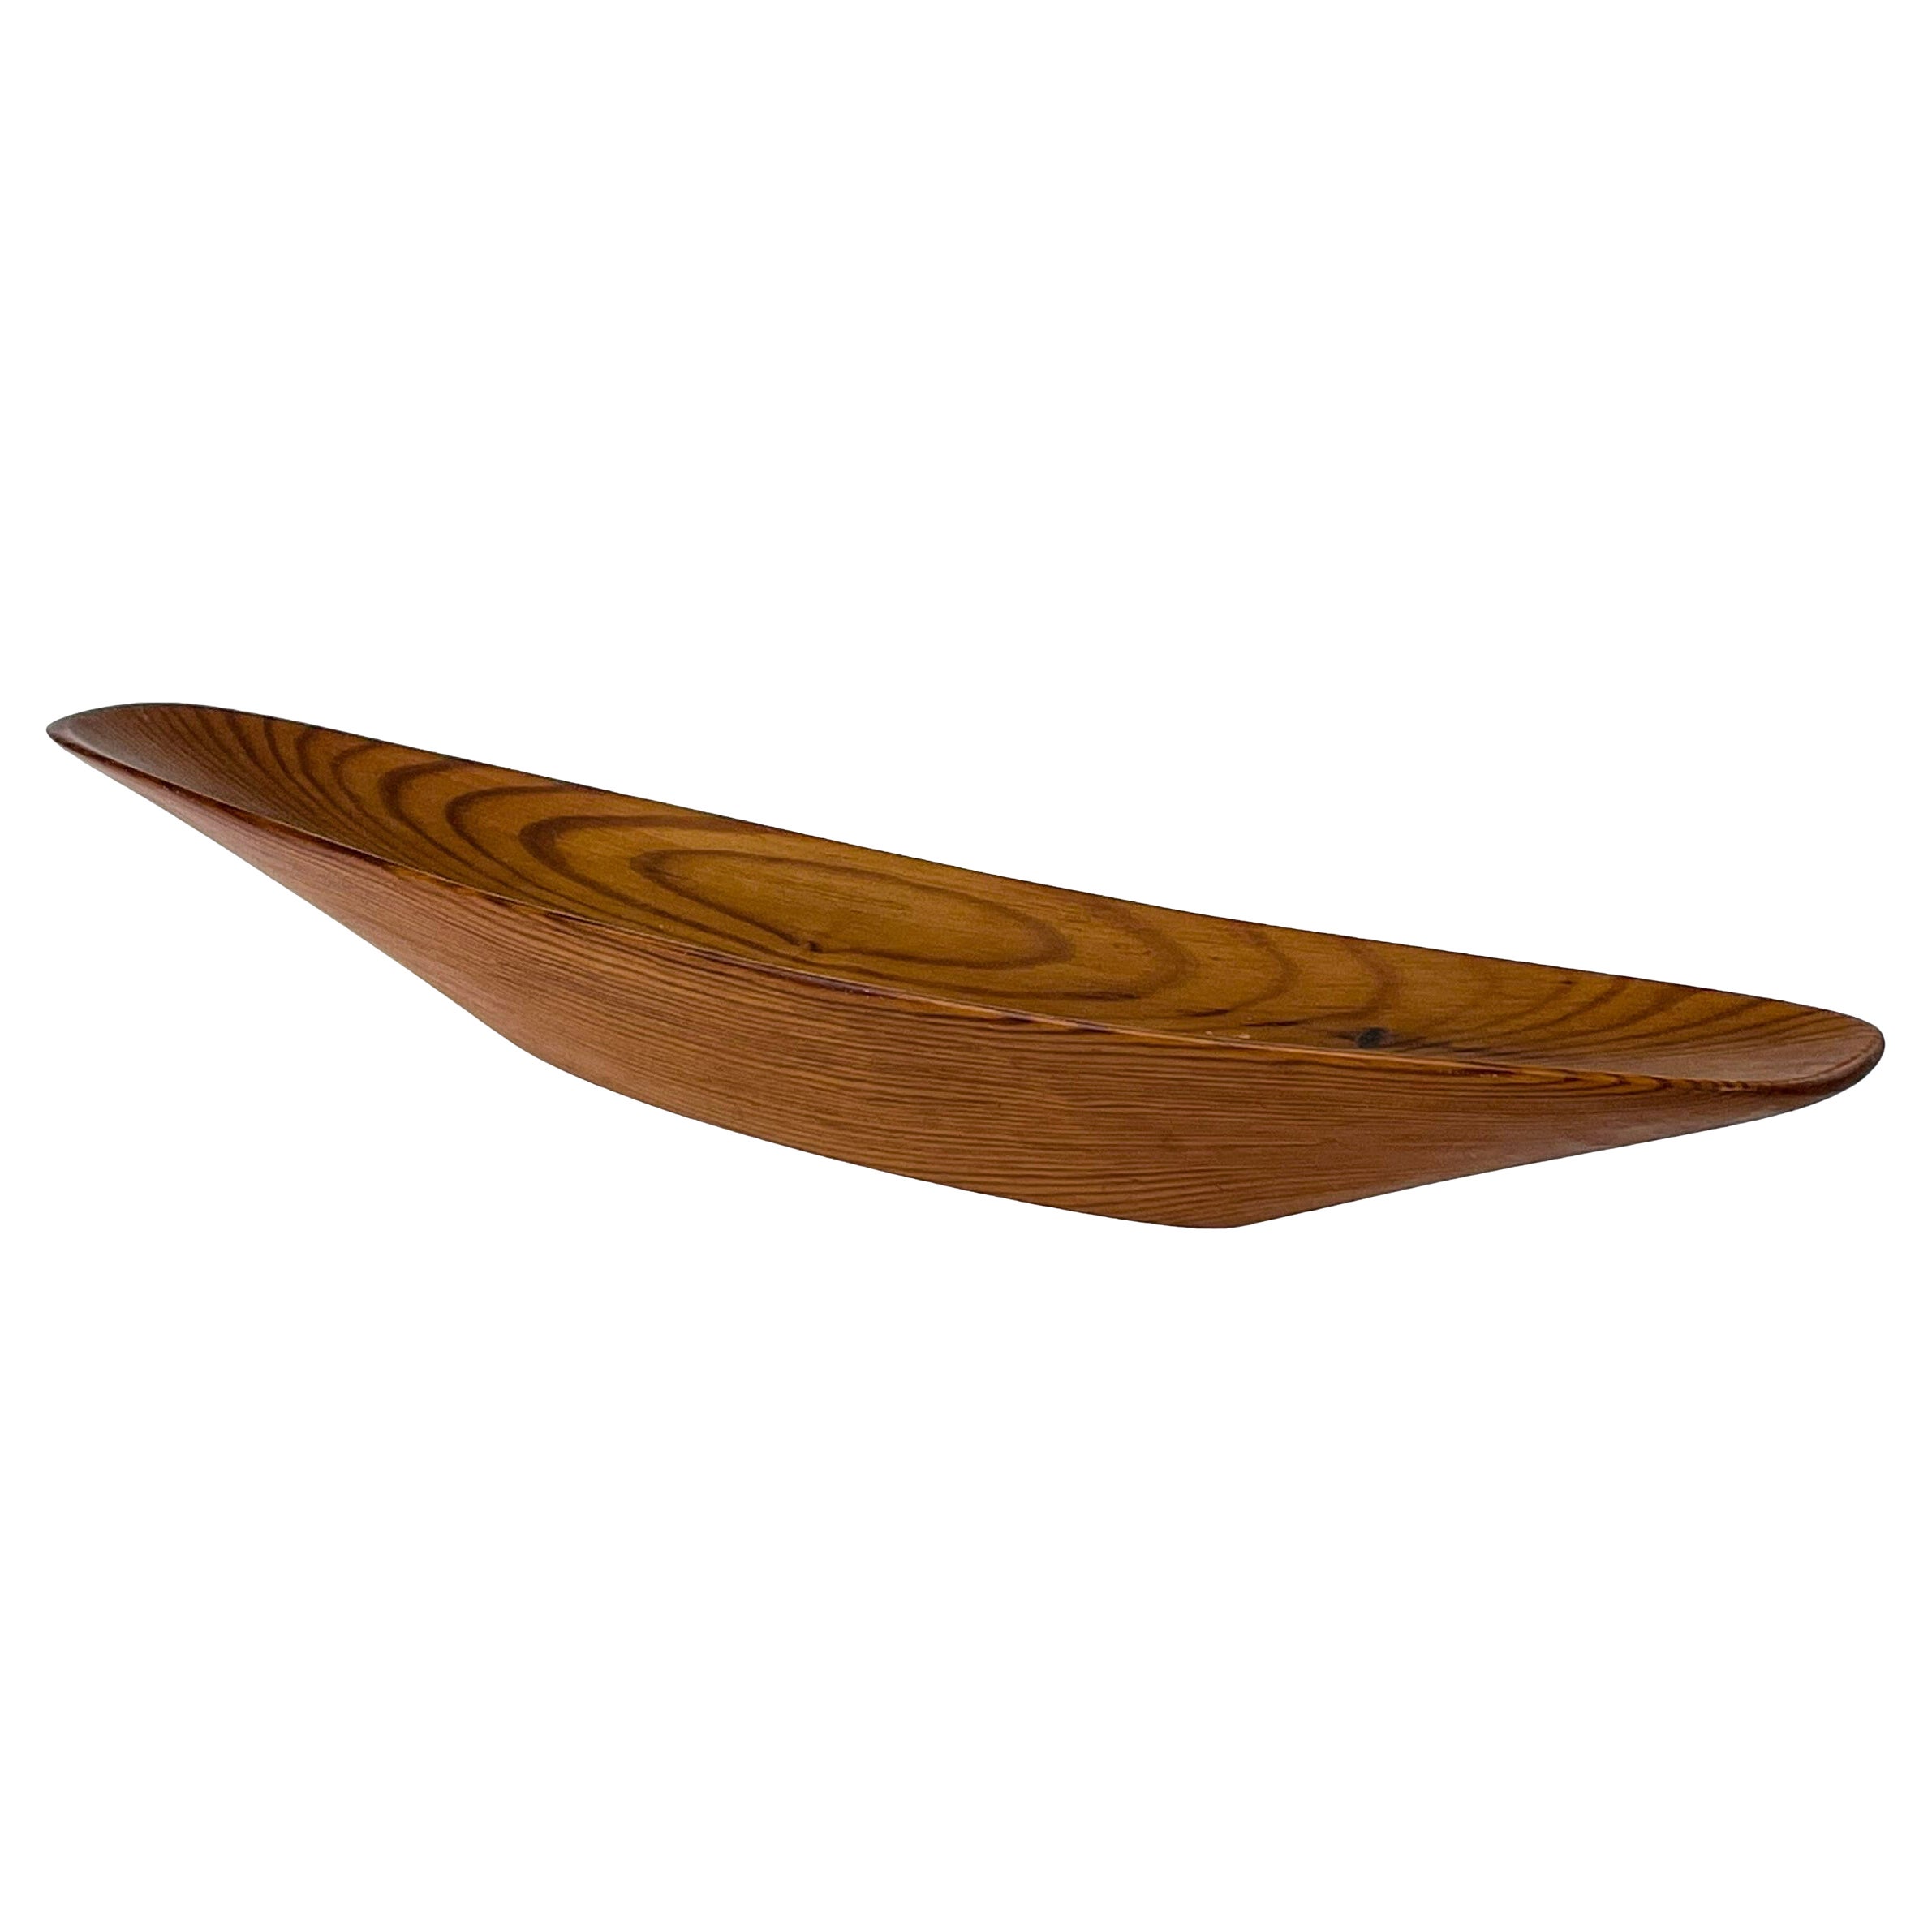 Scandinavian Modern Sakari Pykälä a Unique Handcarved Larchwood Boatshaped Dish

A handcarved, large larchwood boatshaped dish. Made by the Finnish sculptor Sakari Pykälä, most likely in the 1960's.

This dish is an unique piece and fully signed /